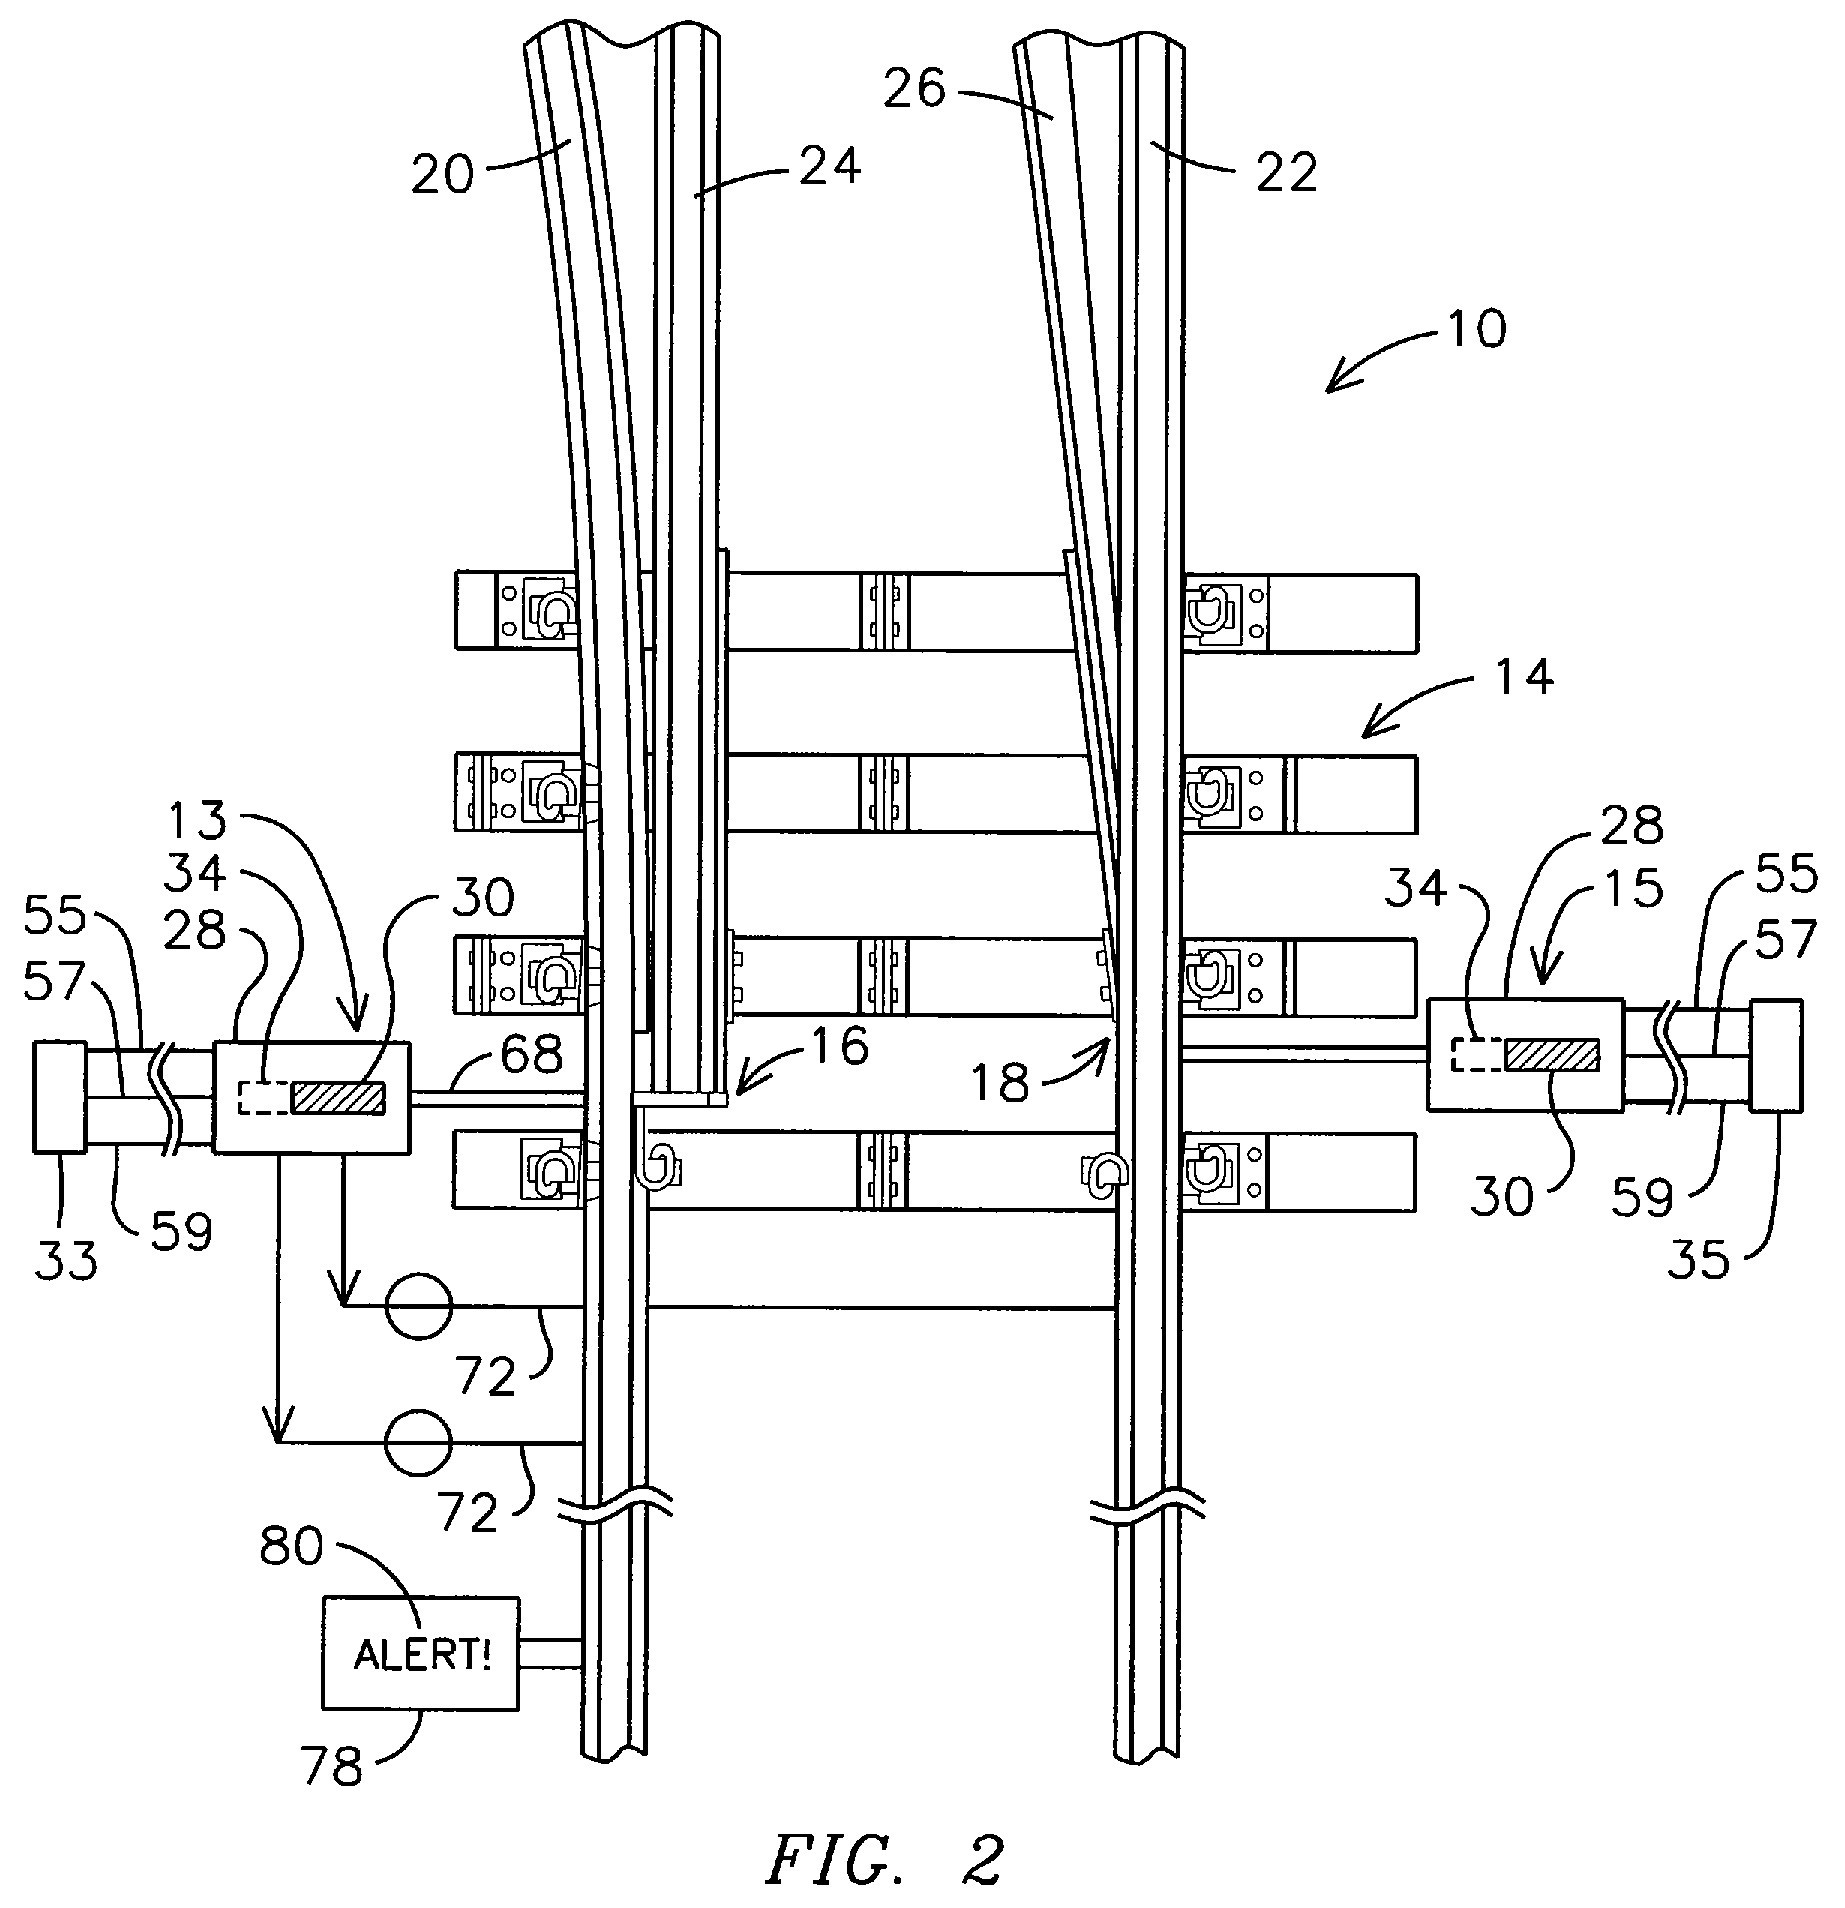 System and method for temporary protection operation of a controller box for a railroad switch turnout